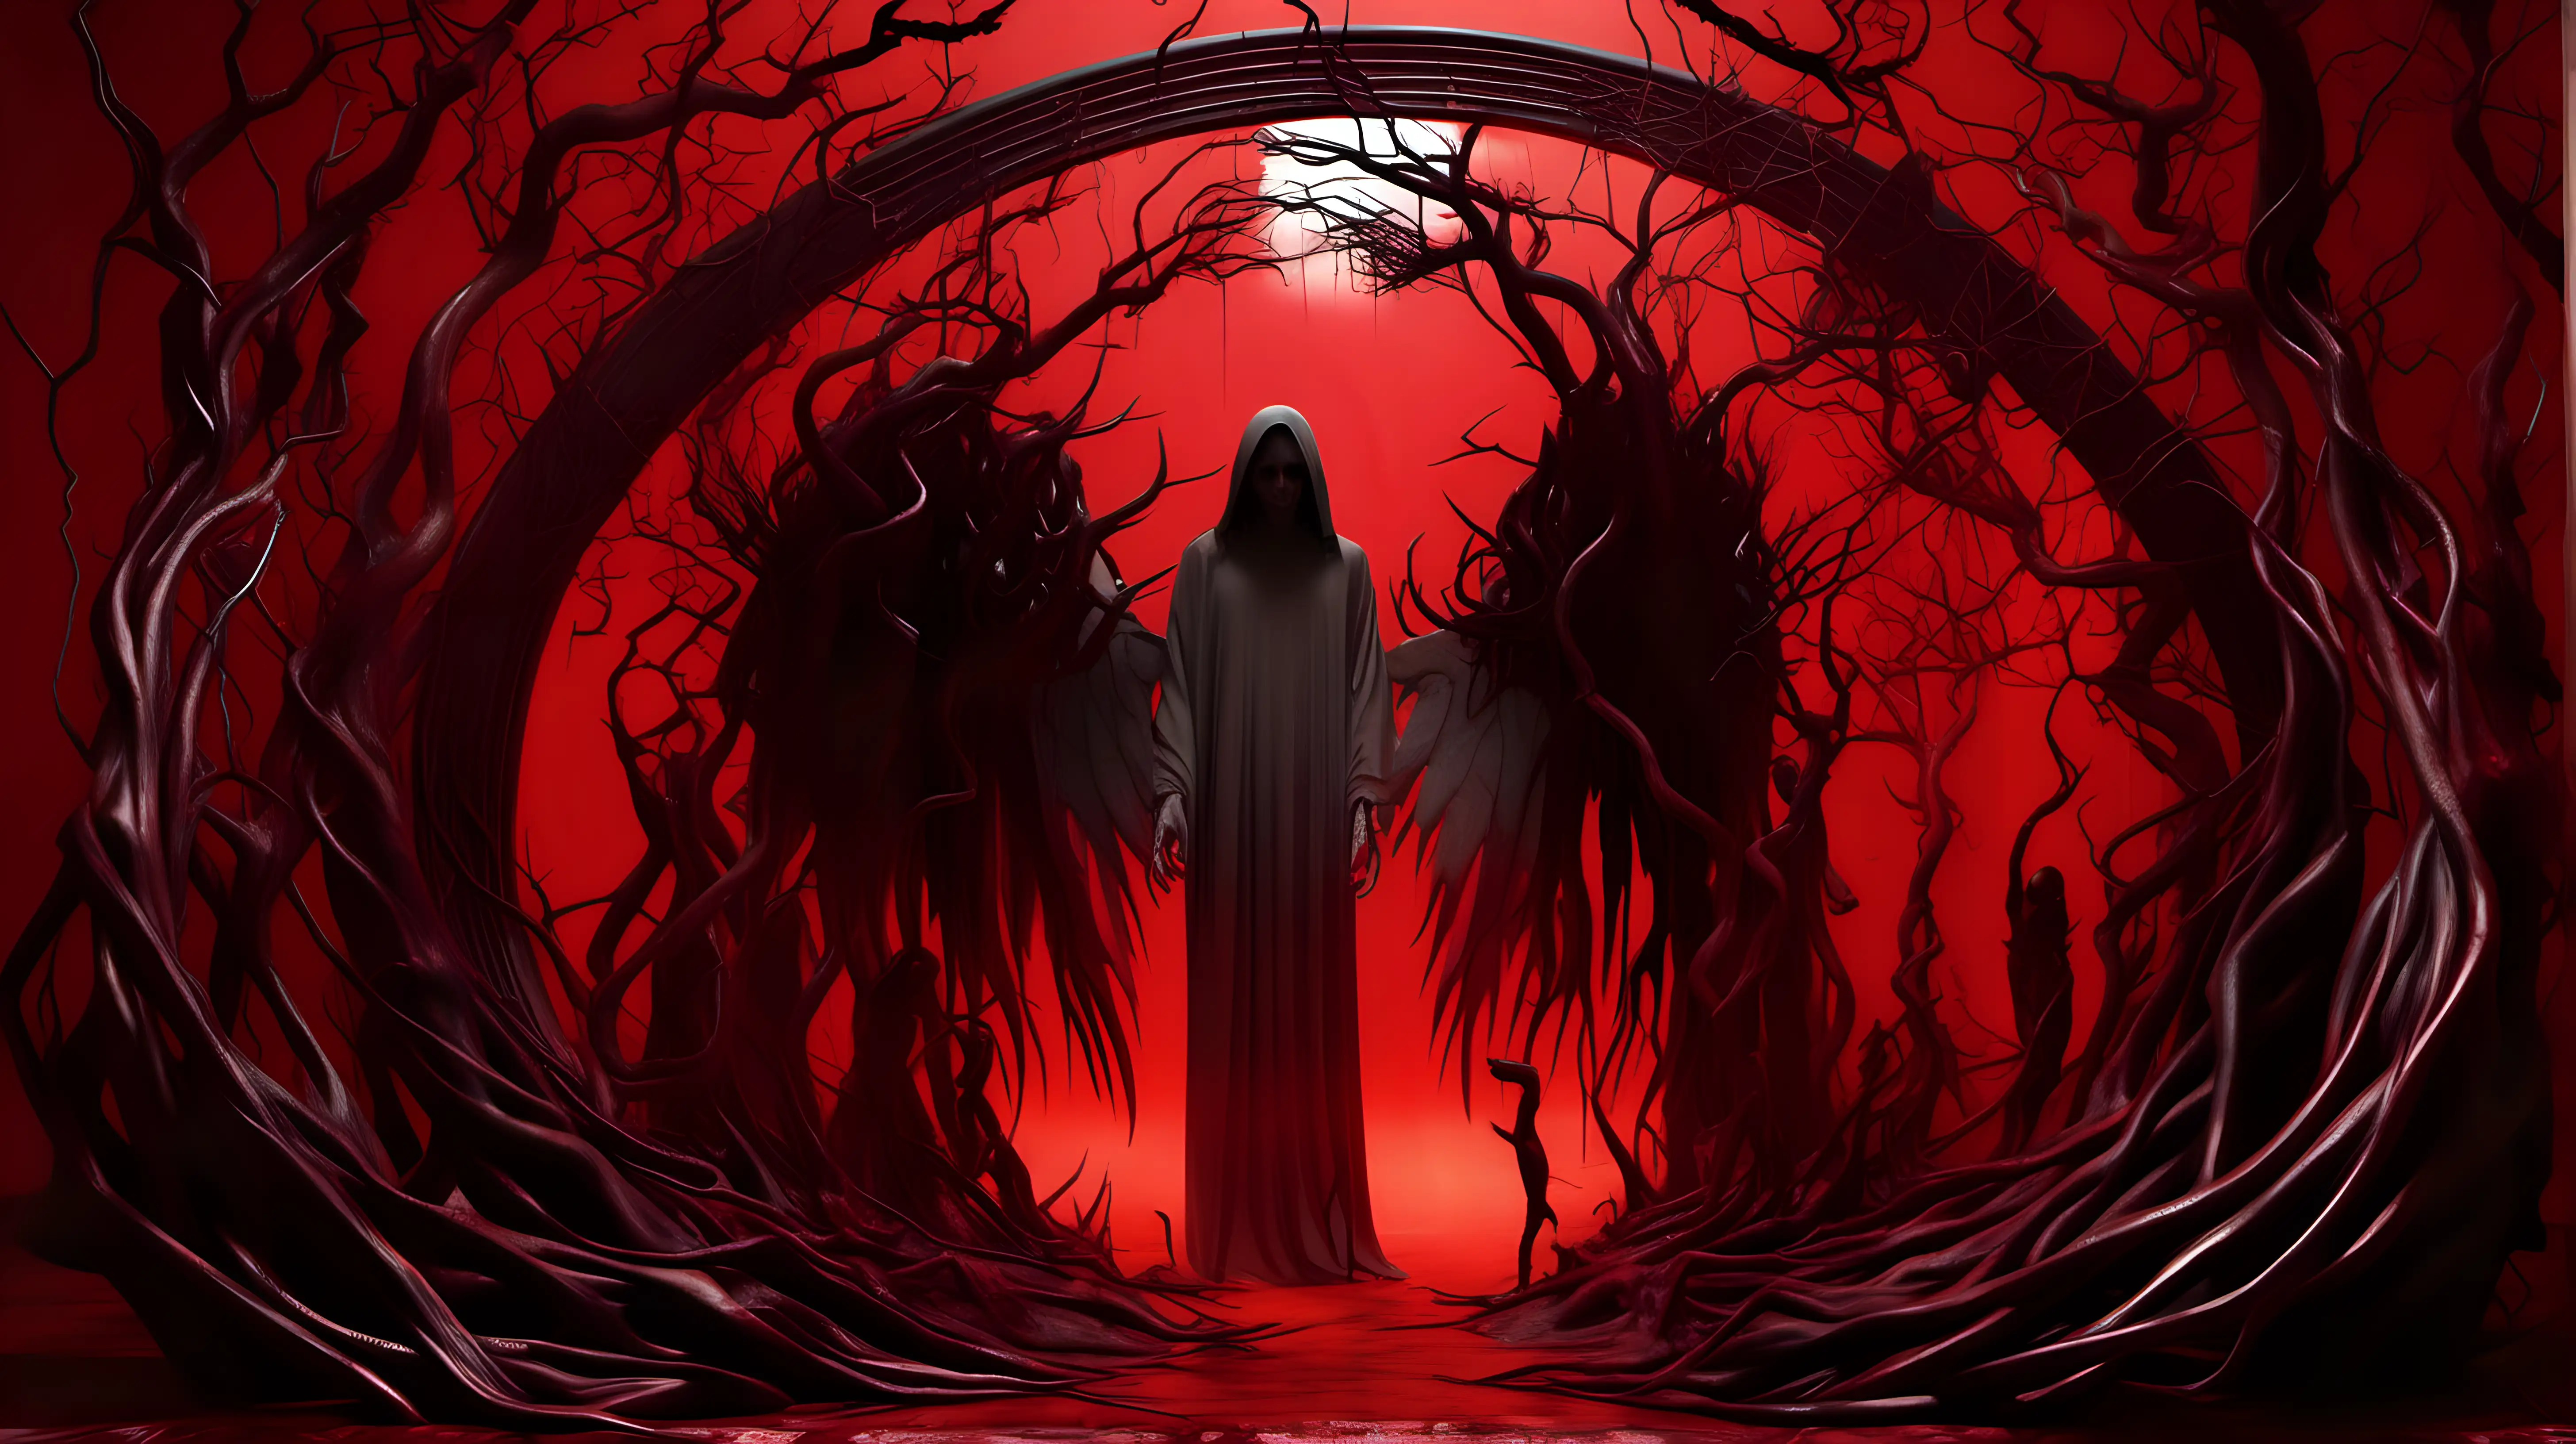 Ethereal Angel of Death Emerges from Crimson Portal amidst Demonic Silhouettes